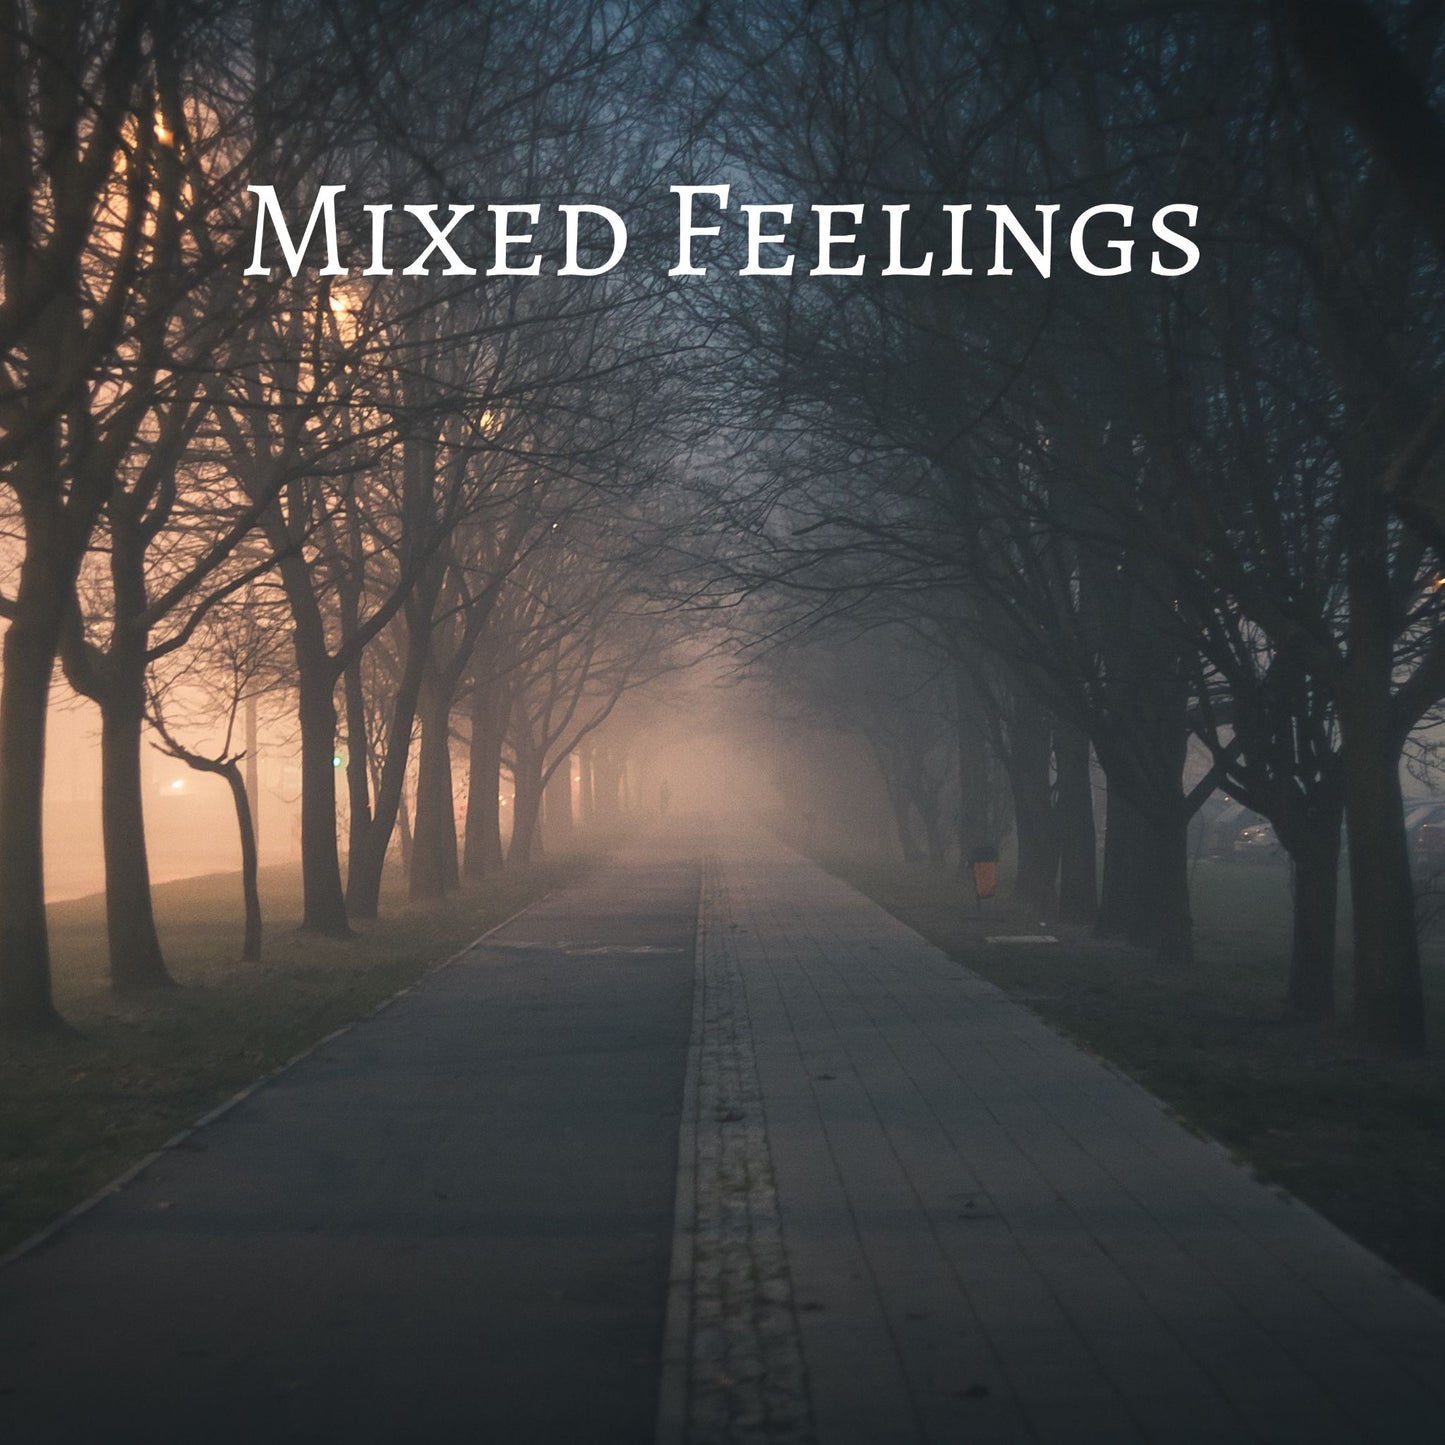 CD Cover of song Mixed Feelings